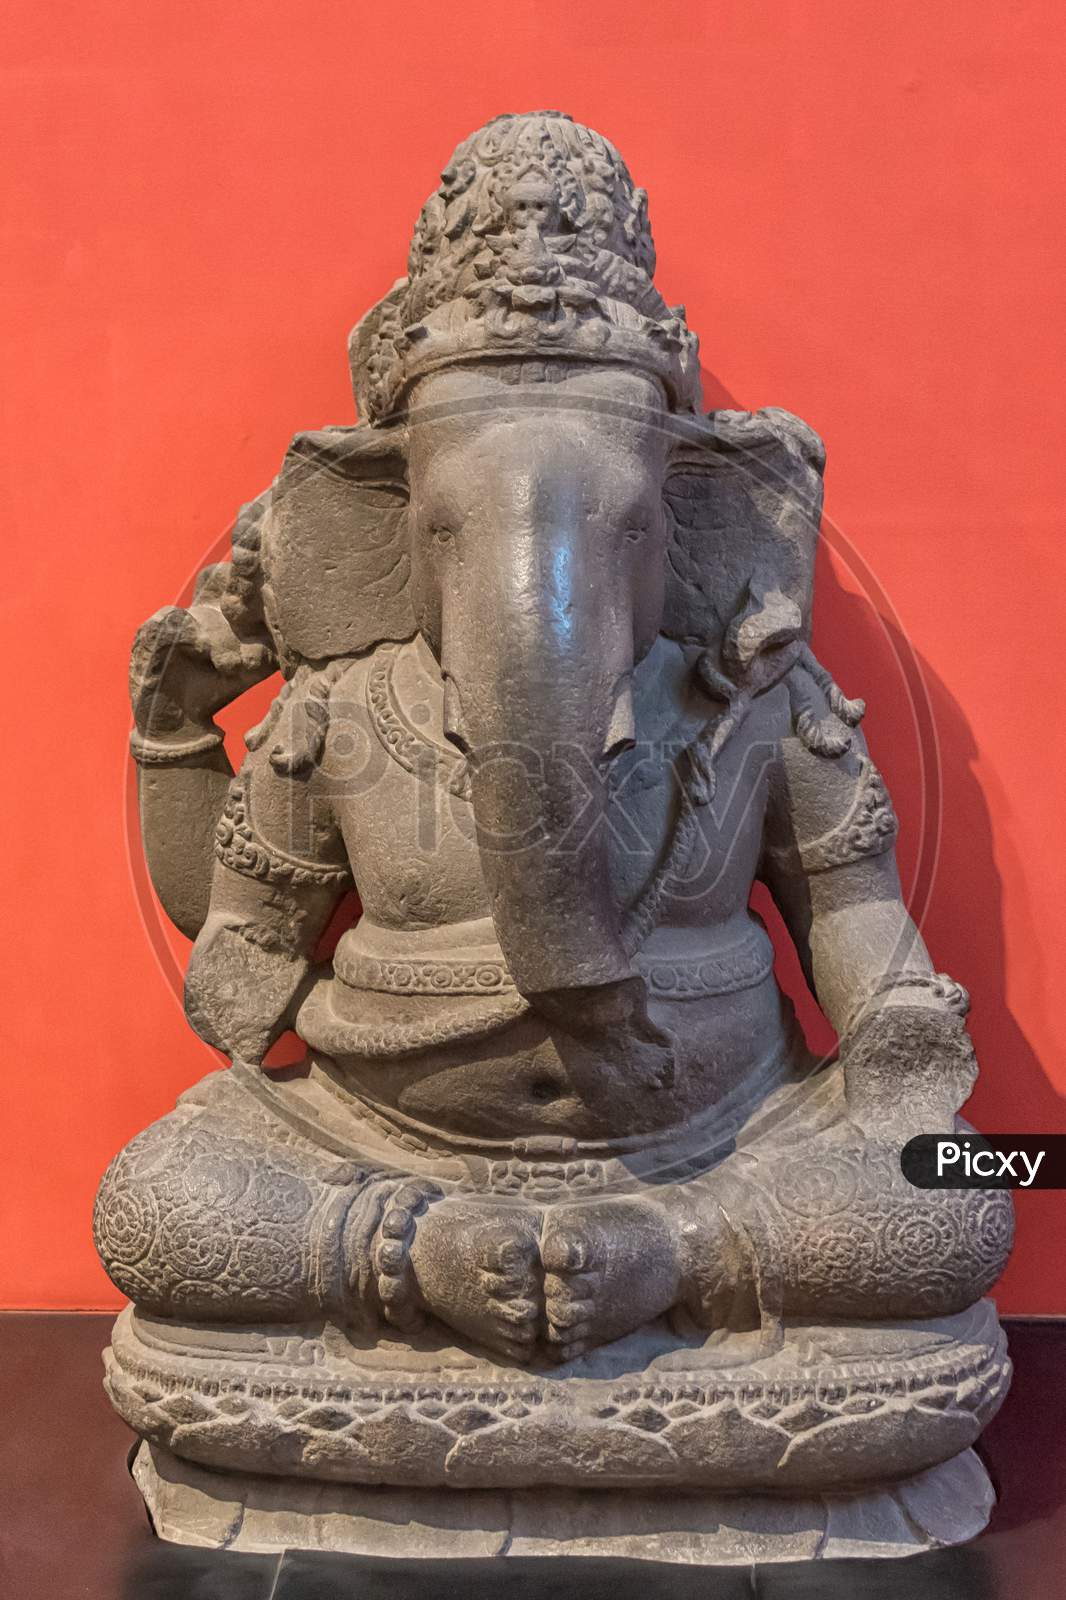 Archaeological Sculpture Of Lord Ganesh, From Indian Mythology